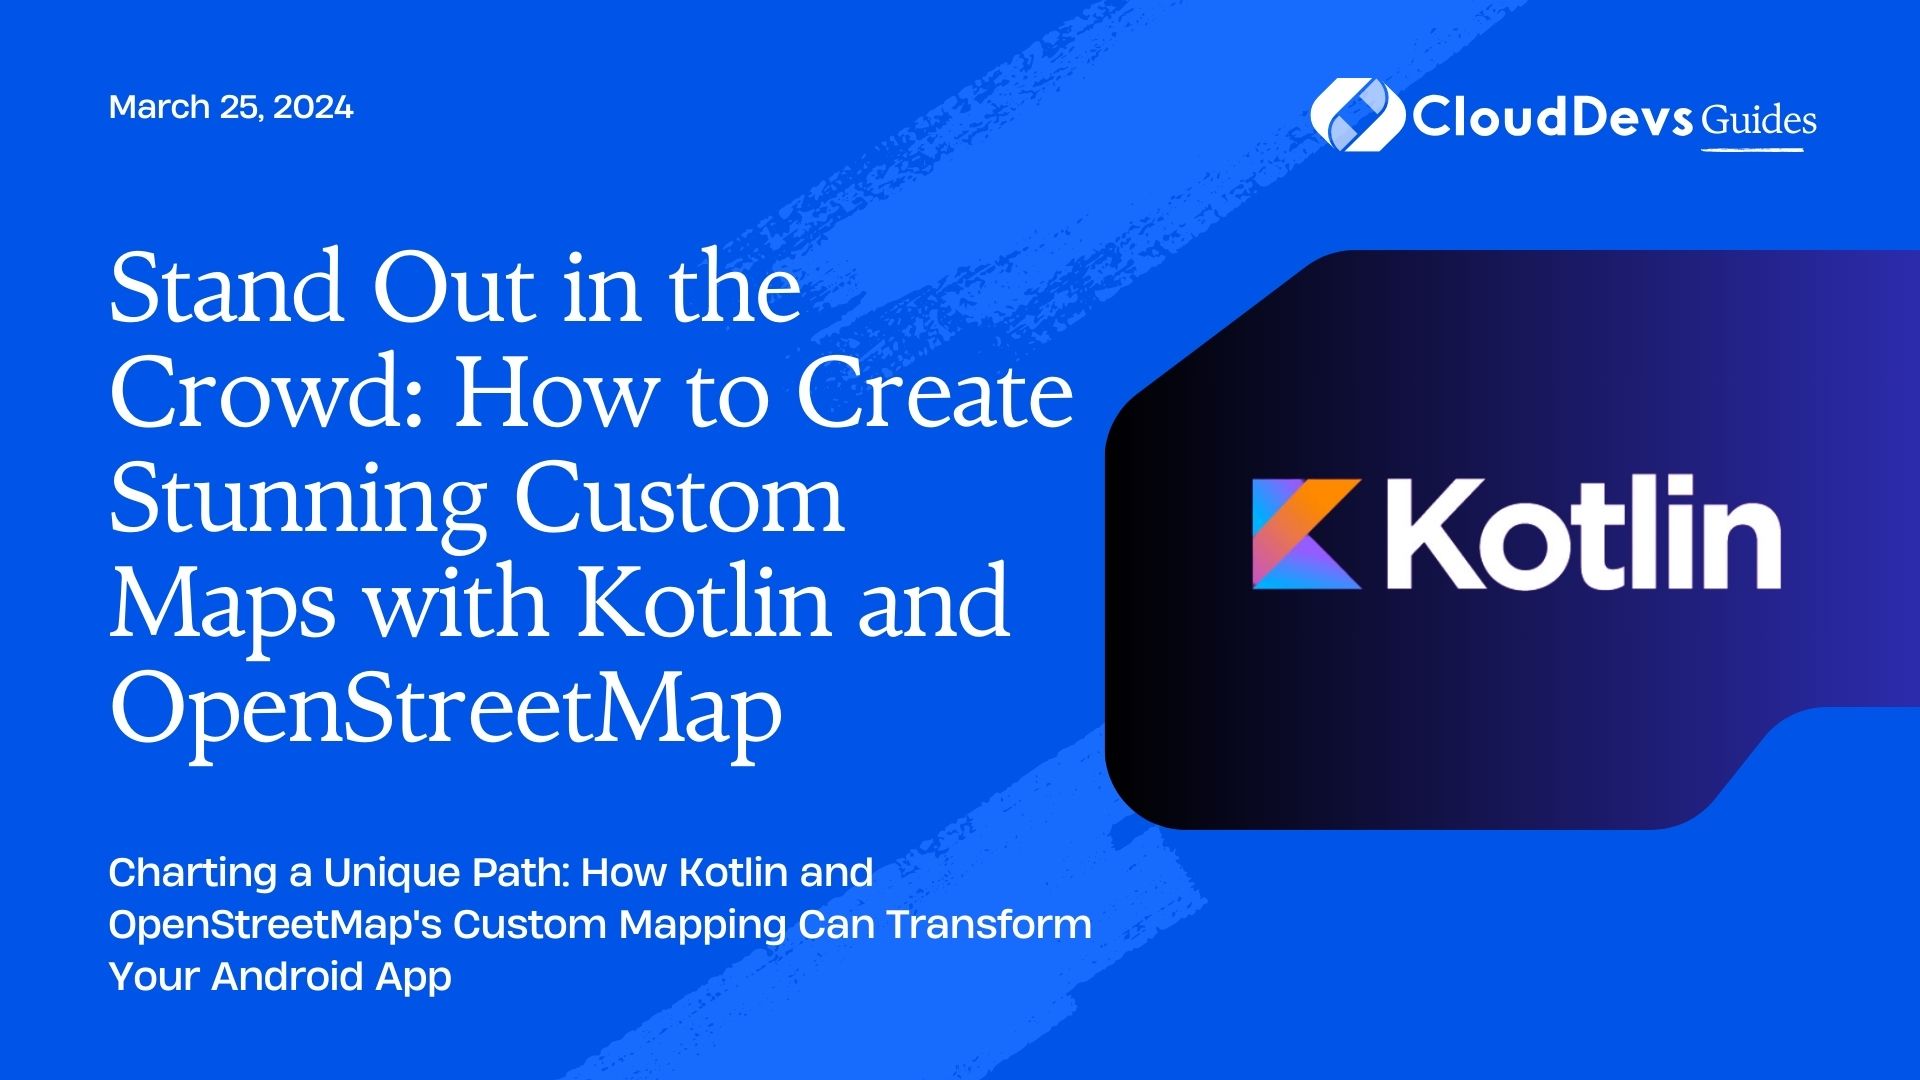 Stand Out in the Crowd: How to Create Stunning Custom Maps with Kotlin and OpenStreetMap